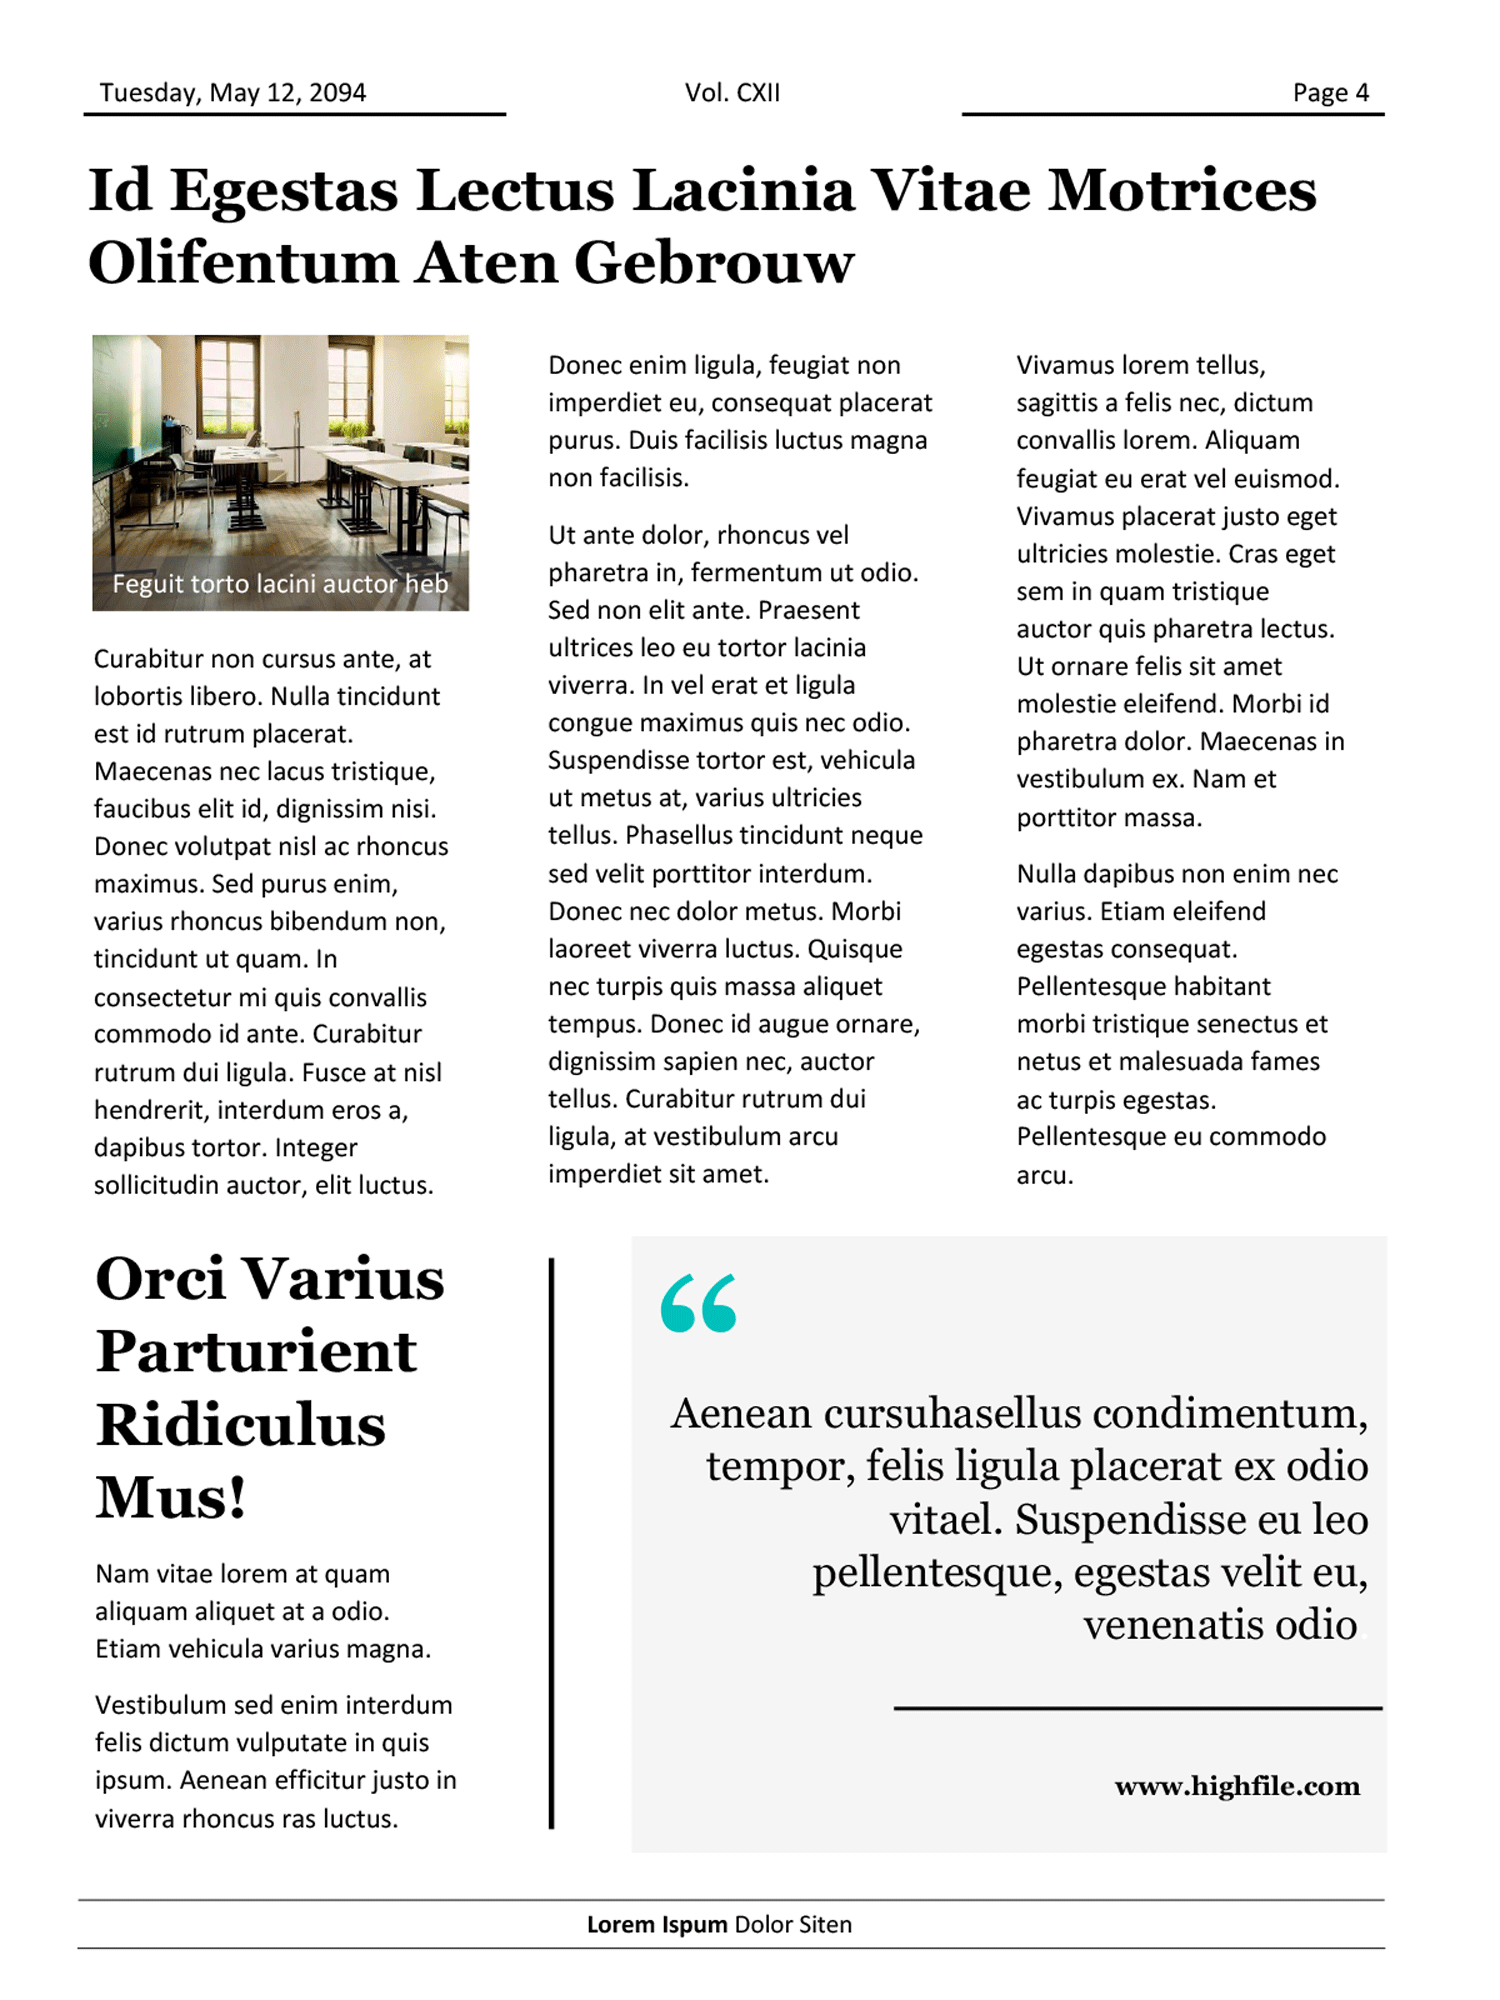 News Article Template for Students - Word, Google Docs